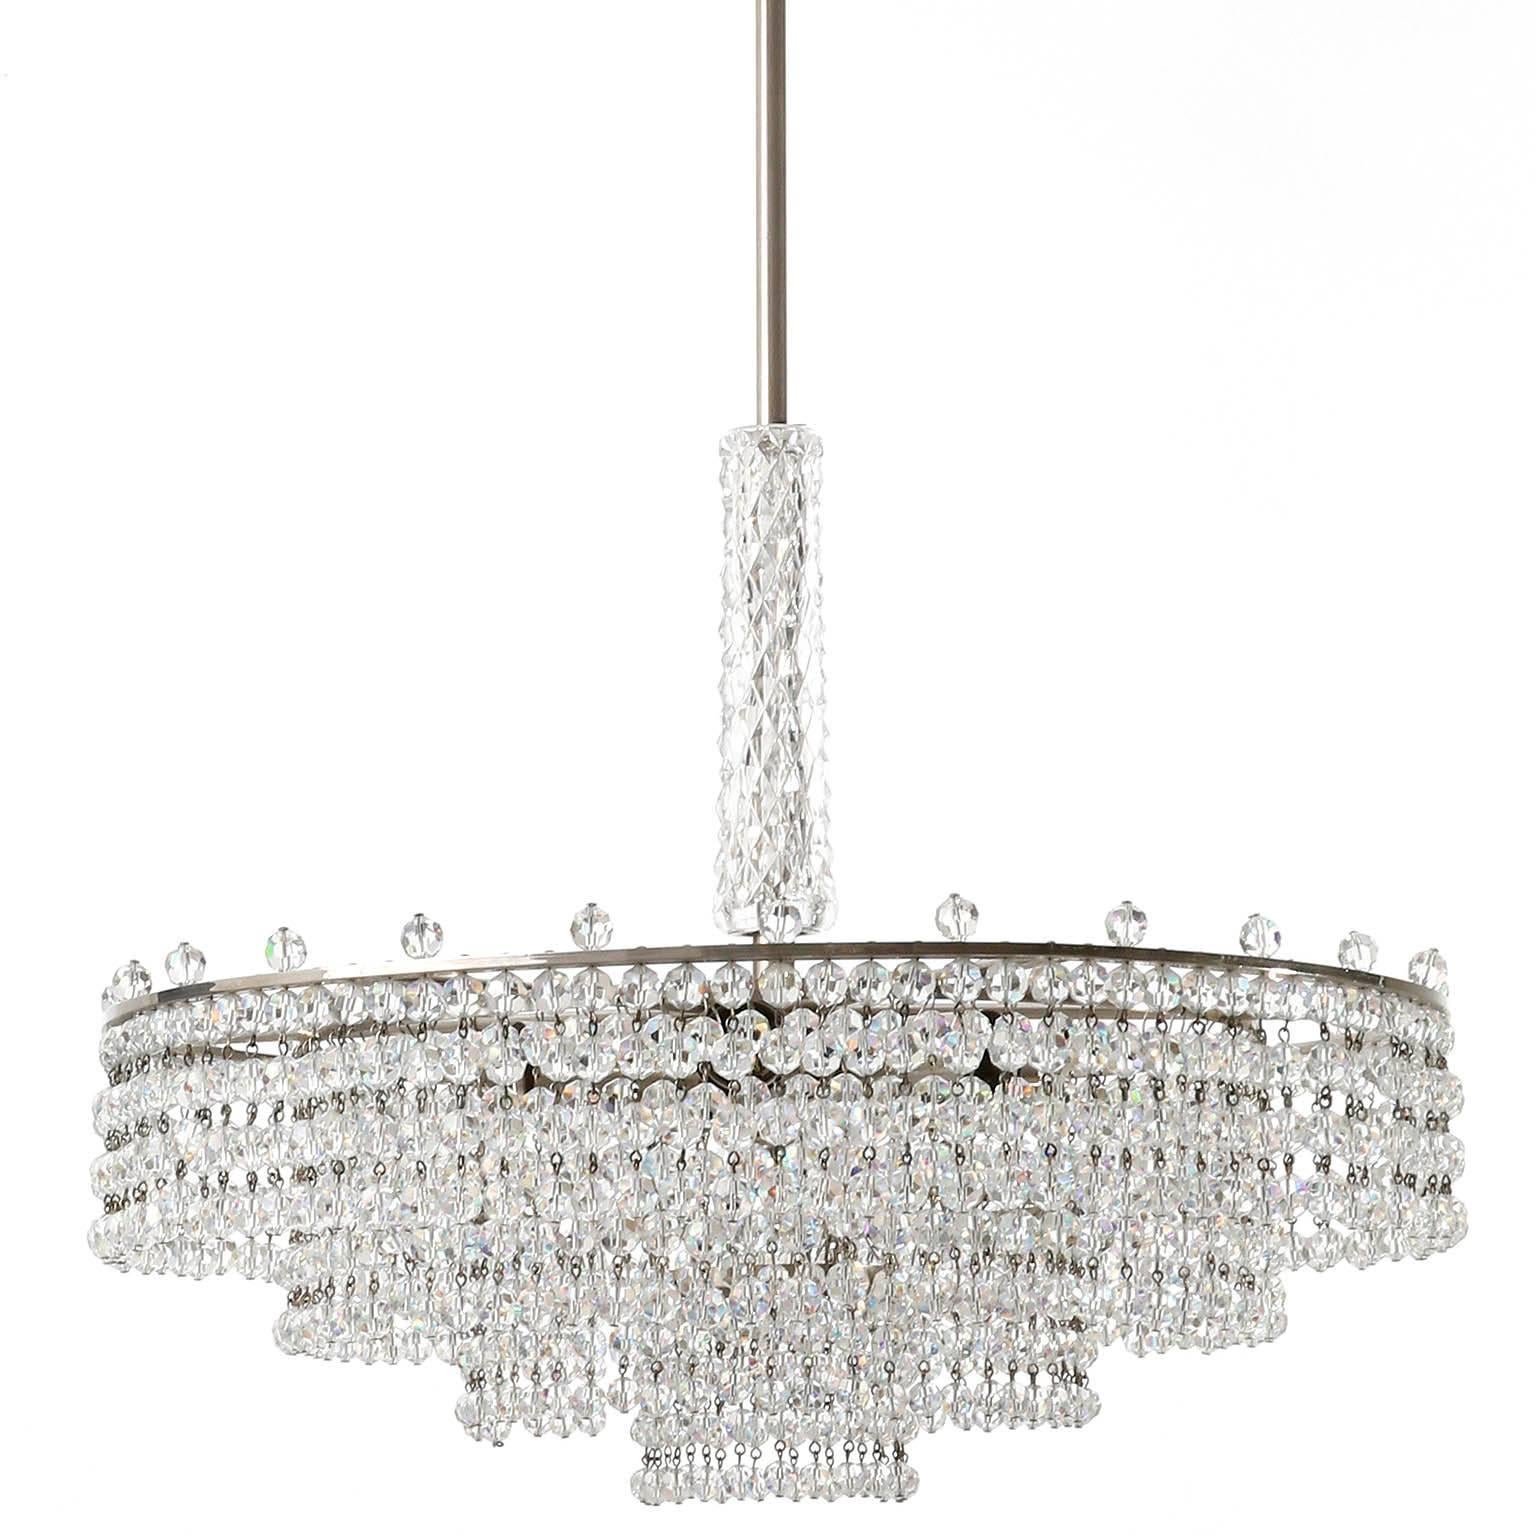 A beautiful chandelier by Palwa (Palme & Walter), Germany, manufactured in midcentury, circa 1960.
It is made of a nickel-plated brass frame decorated with chains of cut crystal glass beads. A part of the rod is covered with a textured glass tube.